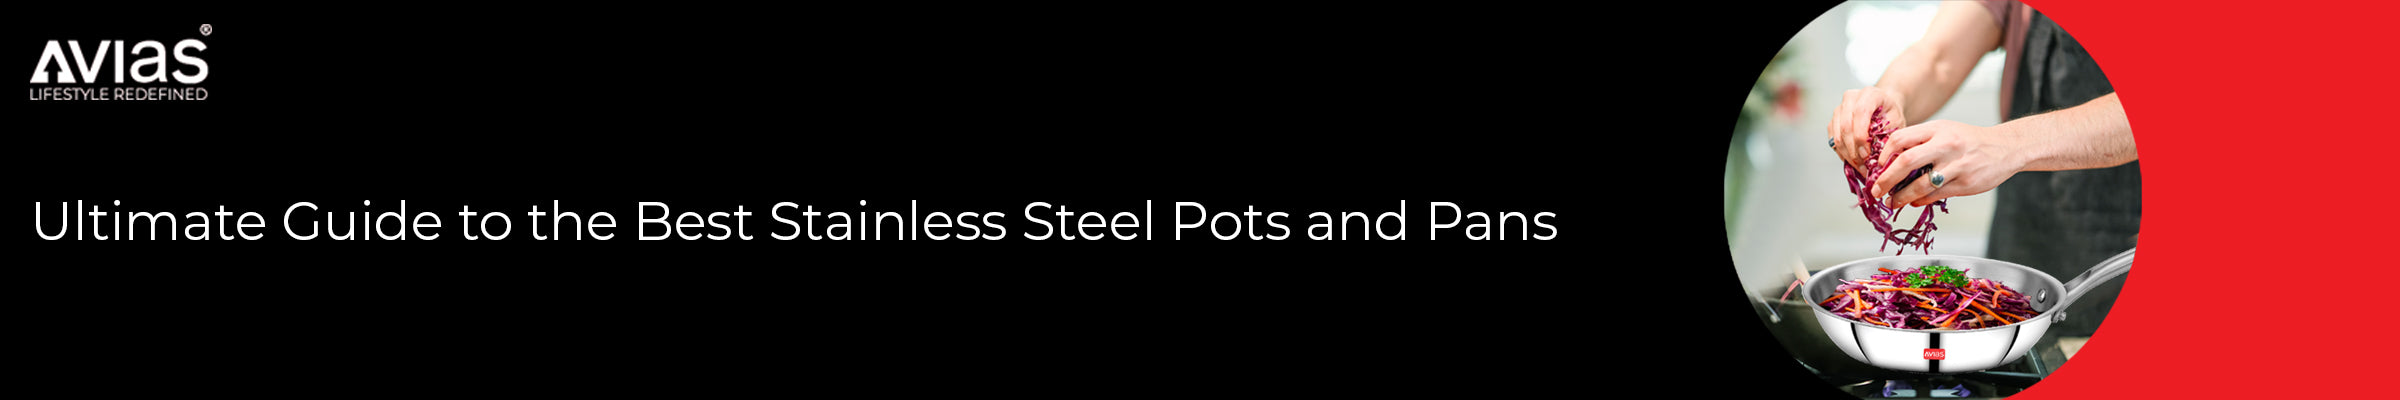 Ultimate Guide to the Best Stainless Steel Pots and Pans from Avias kitchenware and cookware